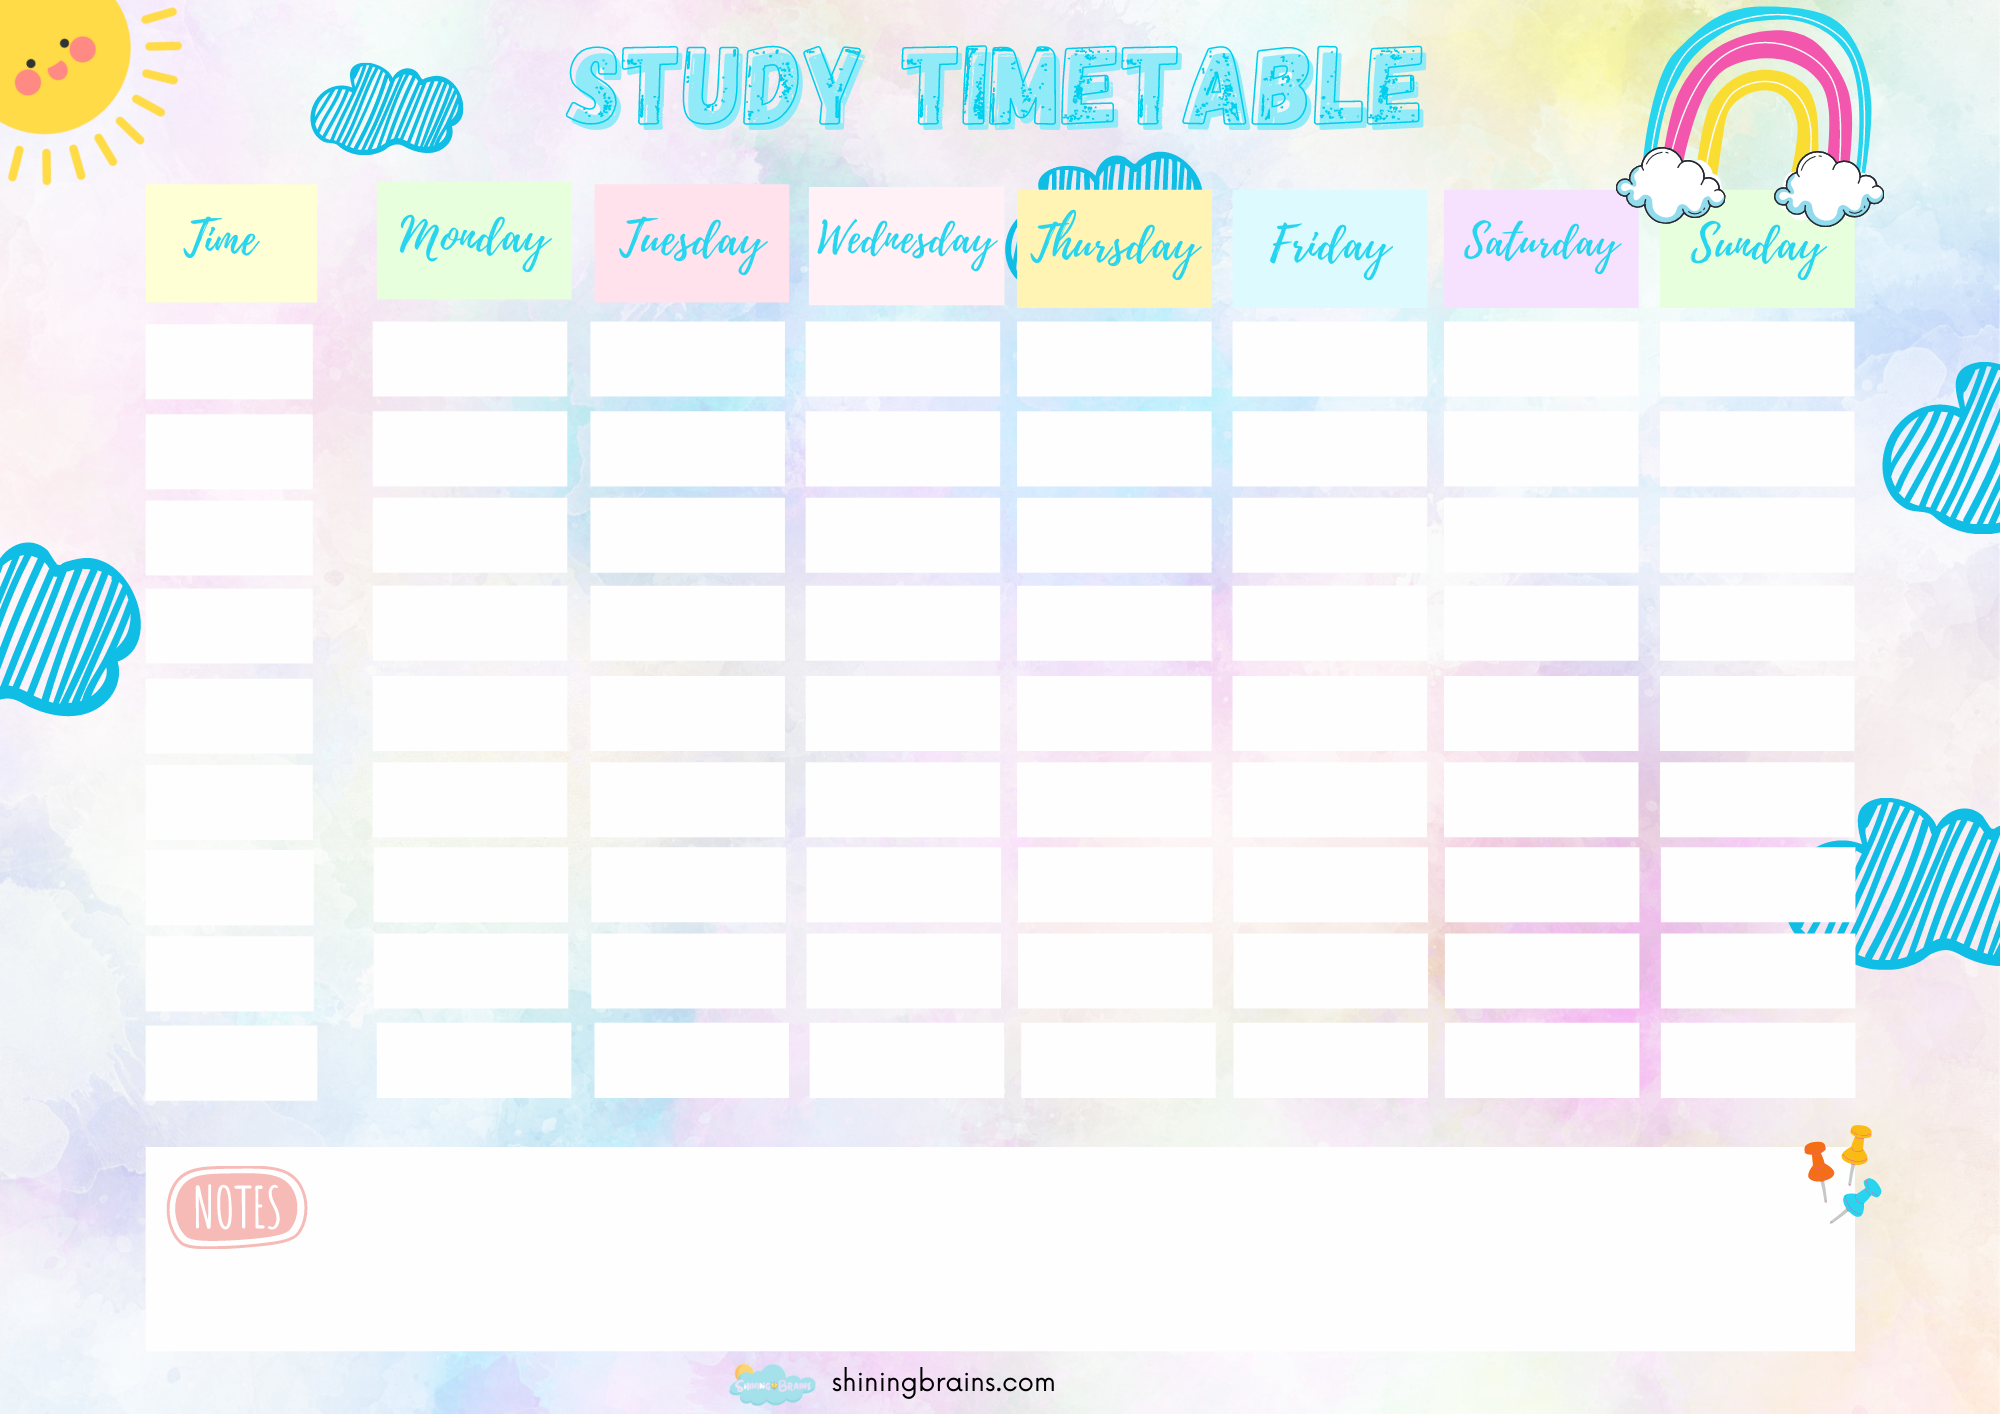 study-timetable-template-for-students-free-printable-shining-brains